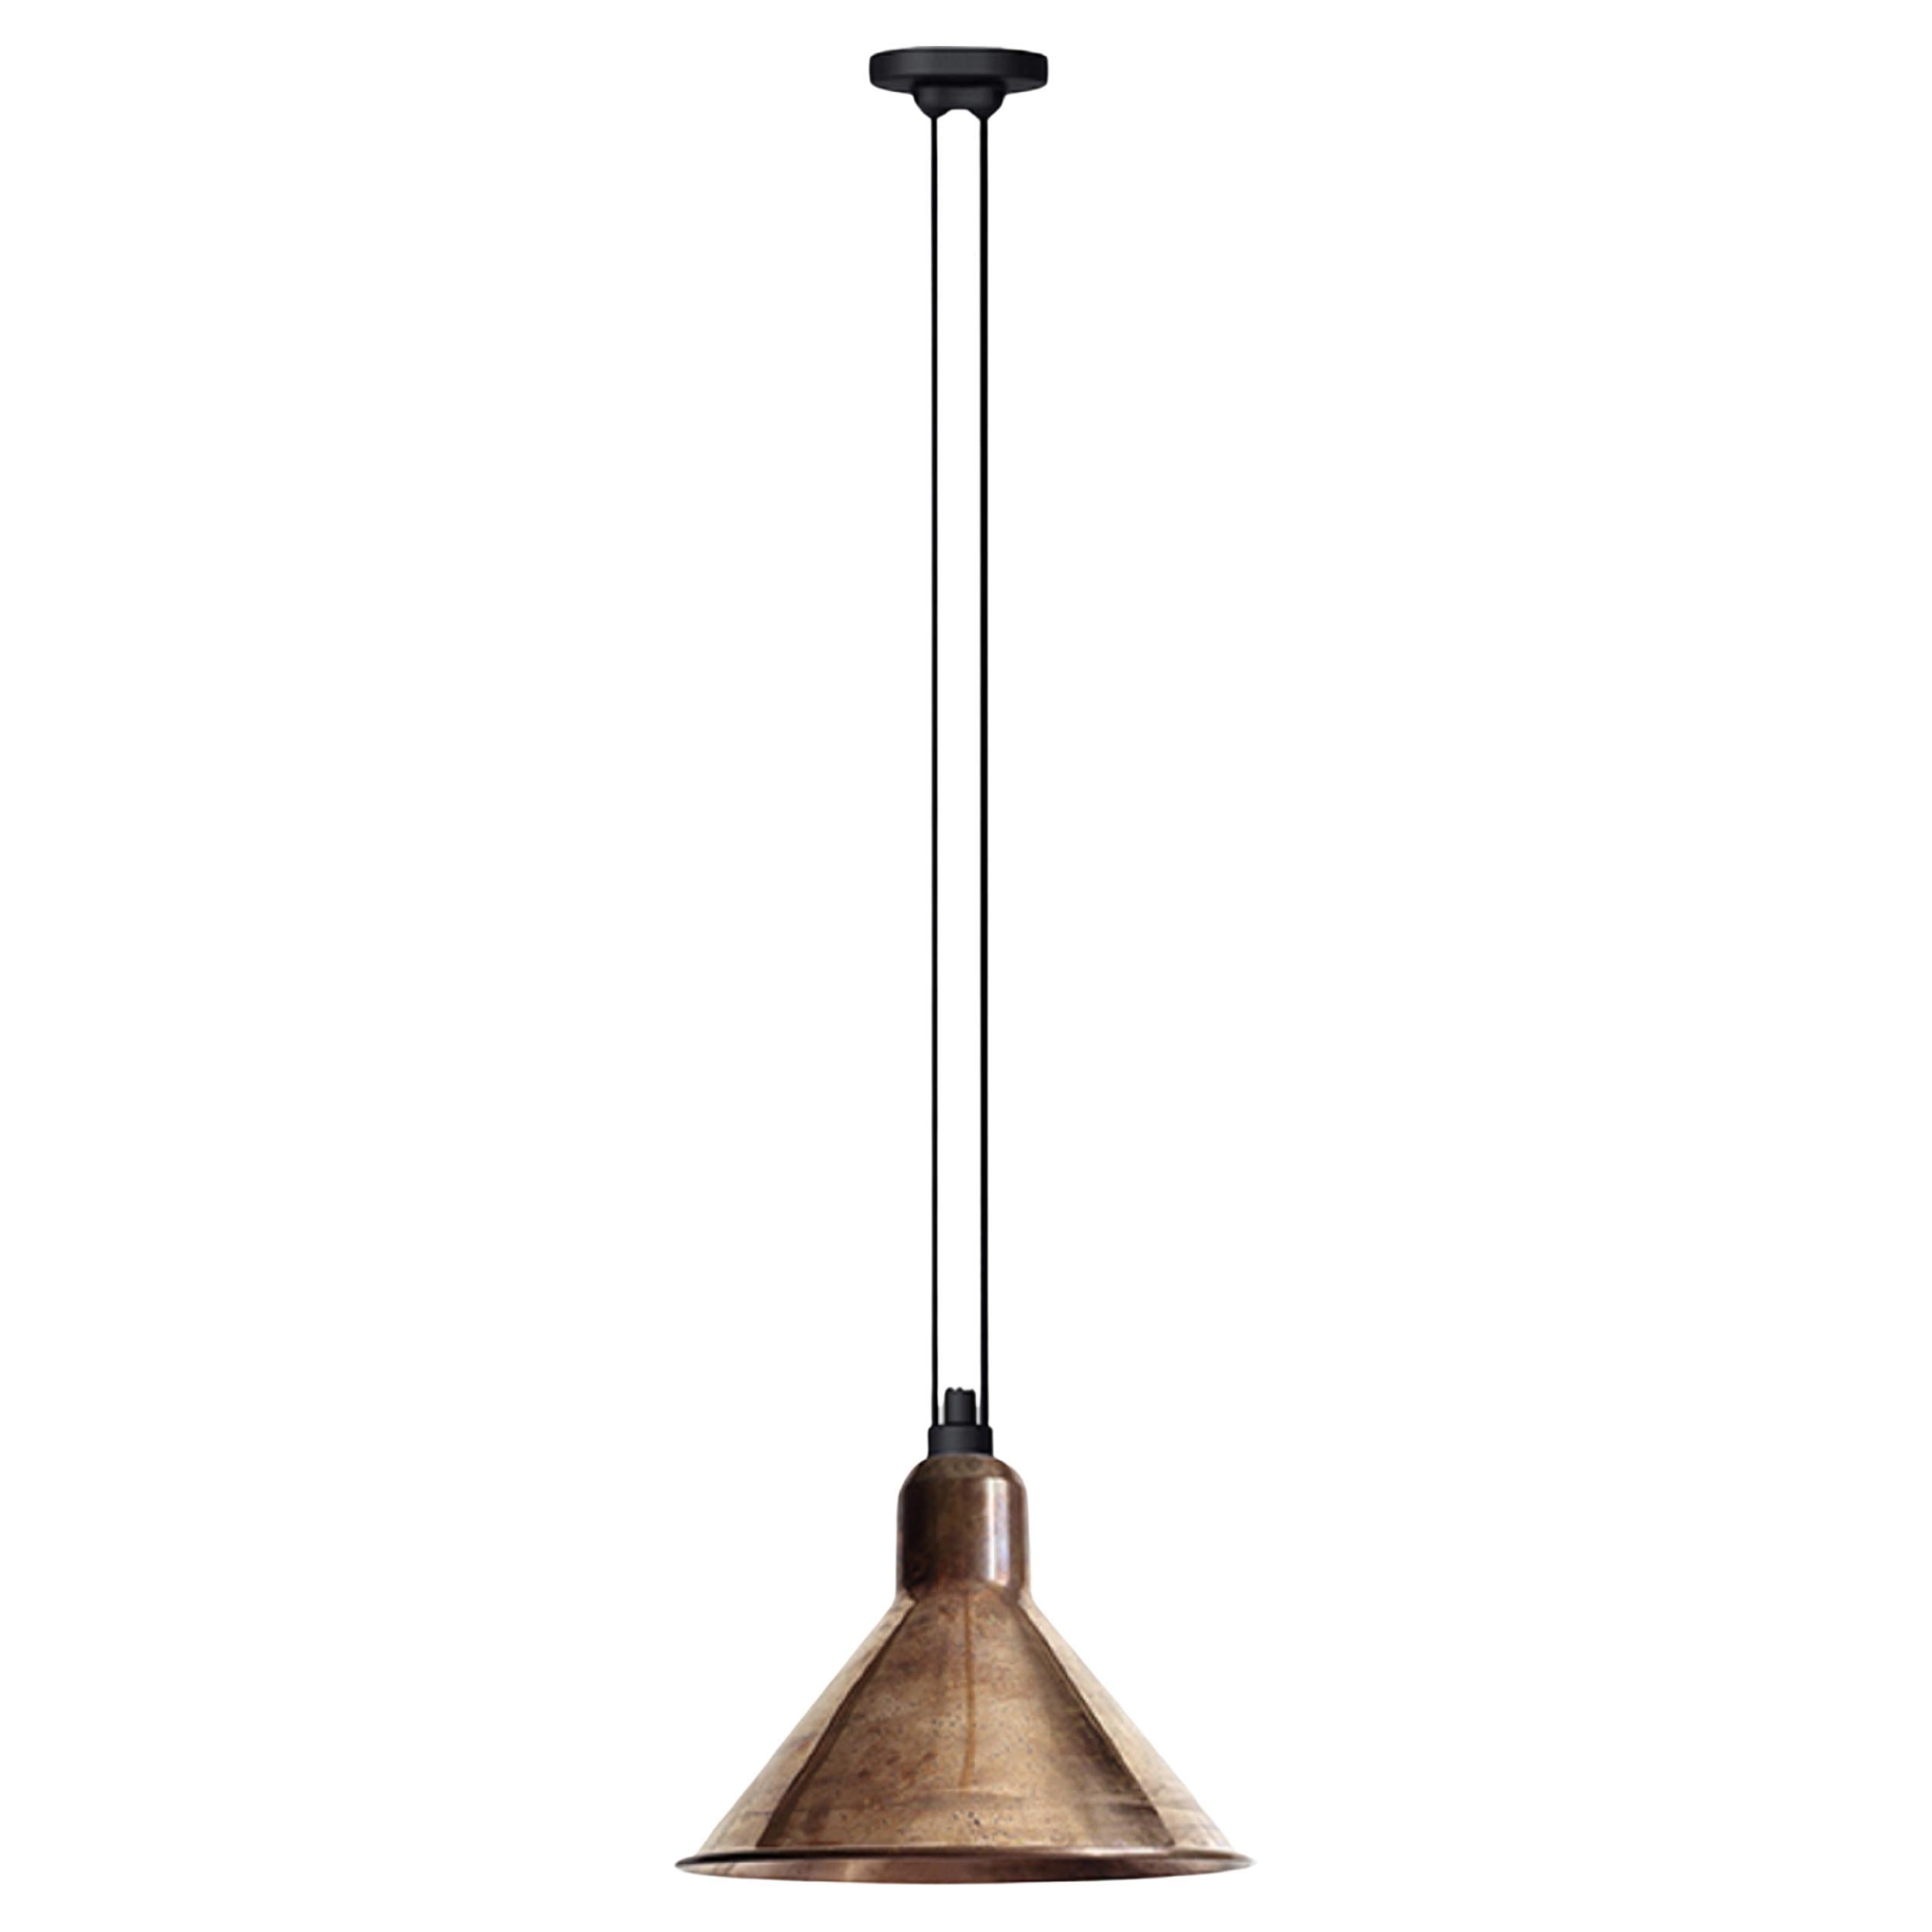 DCW Editions Les Acrobates N°322 XL Conic Pendant Lamp in Raw Copper Shade For Sale